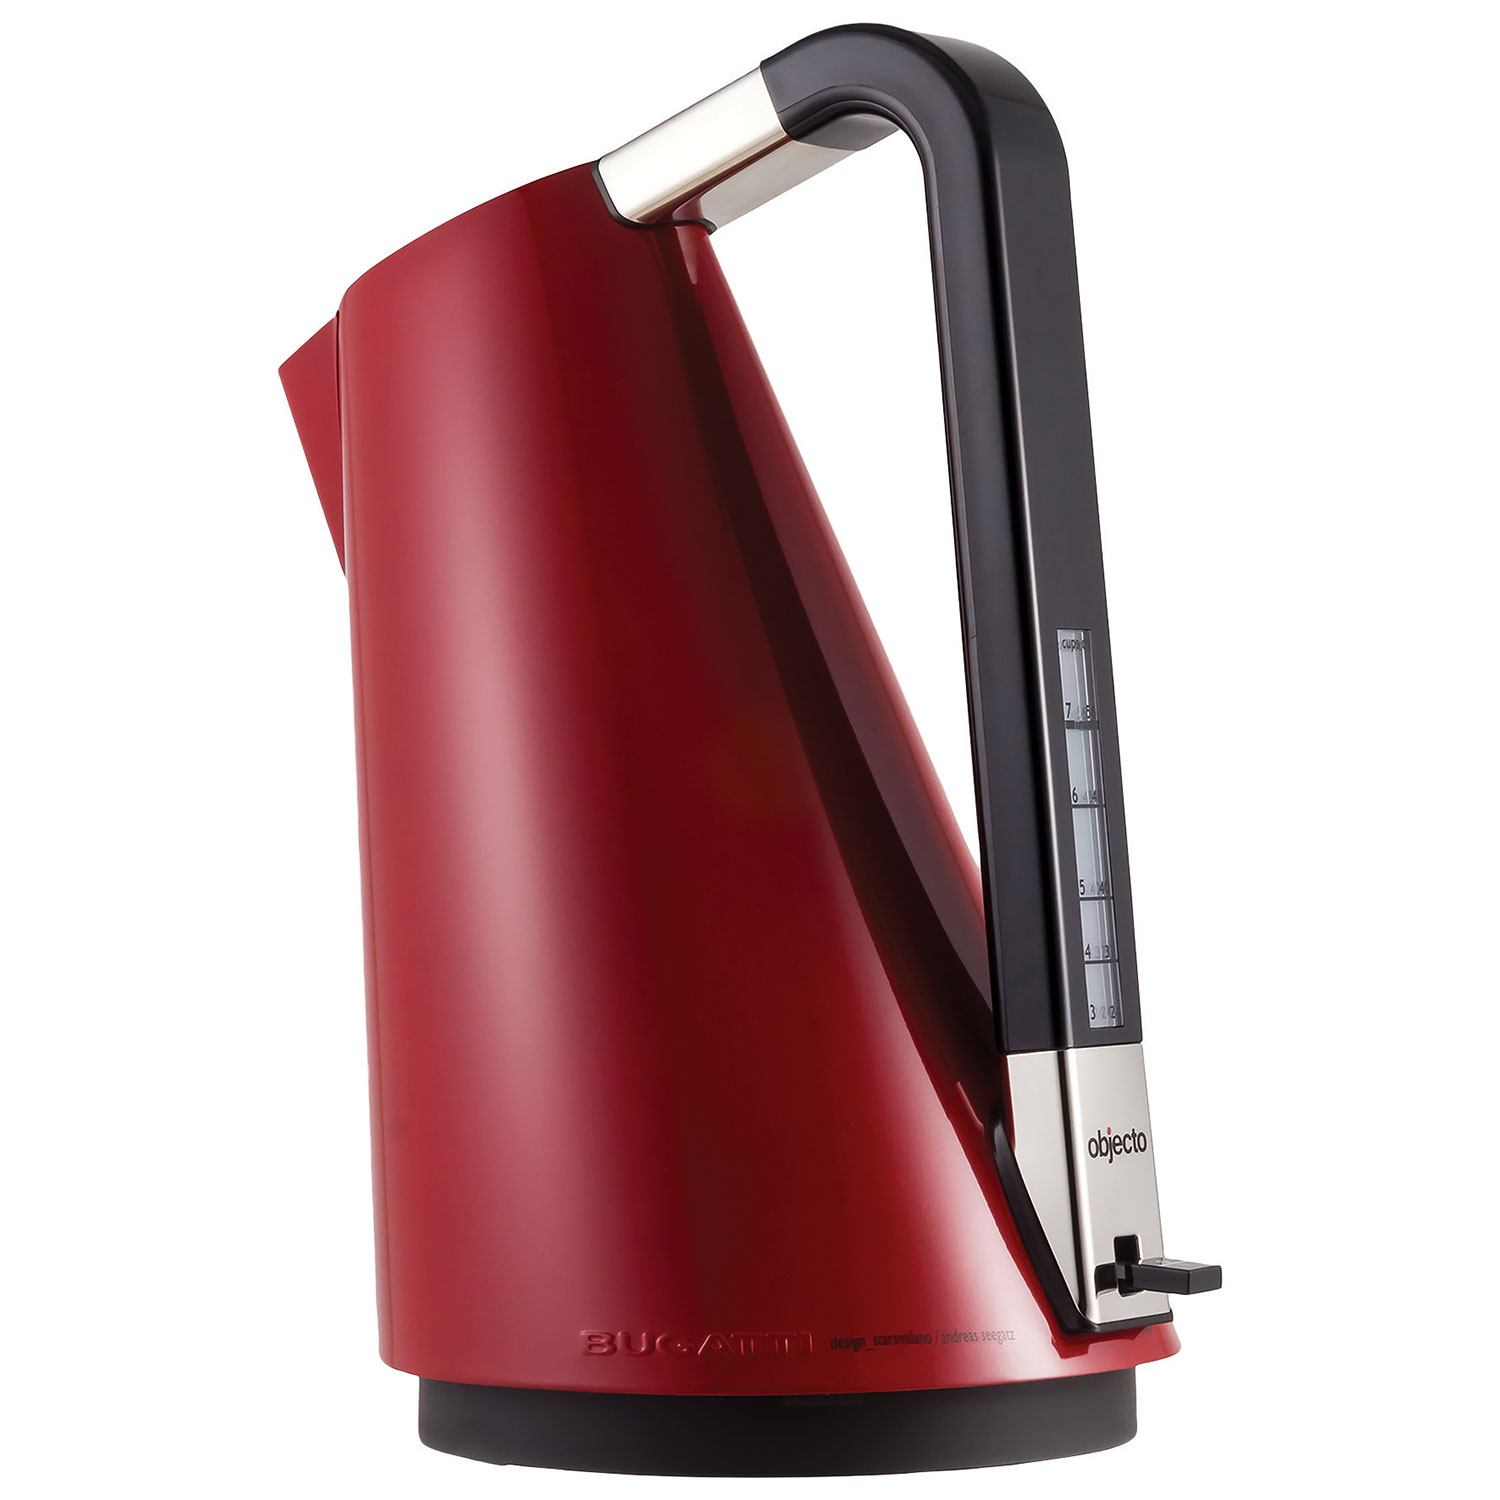 Objecto Electric Kettle - 1.7L - Red : Electric Kettles - Best Buy ...